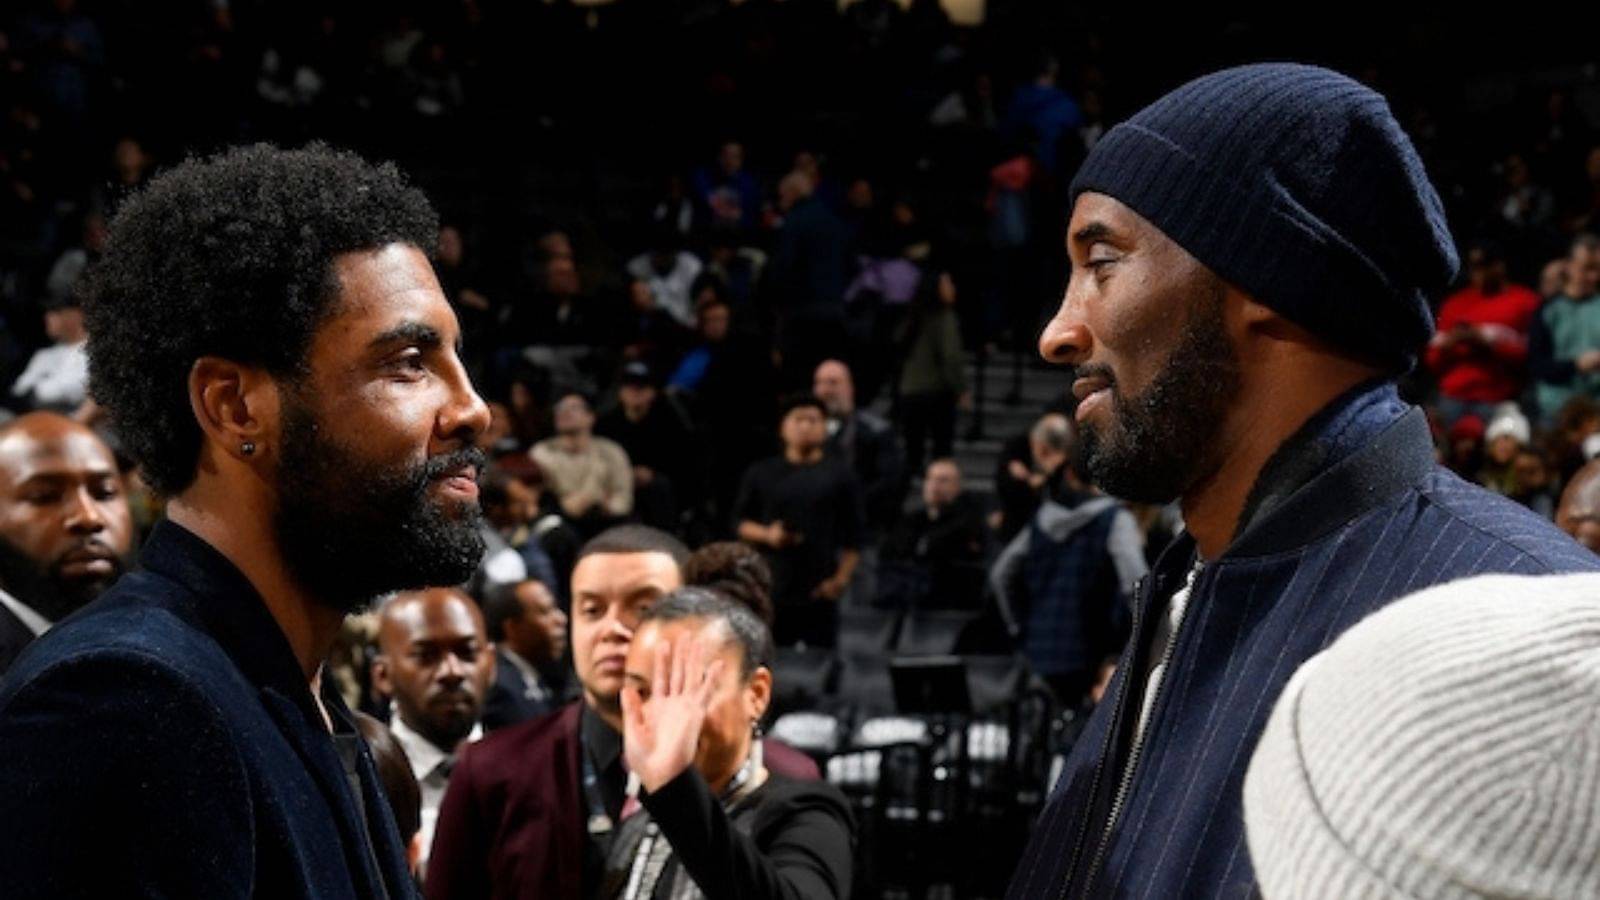 “Kyrie Irving wants the same uniform as Kobe Bryant once wore”: Stephen A. Smith says Nets star ruined his franchise to join Lakers, who’d have $80 million in cap space next summer